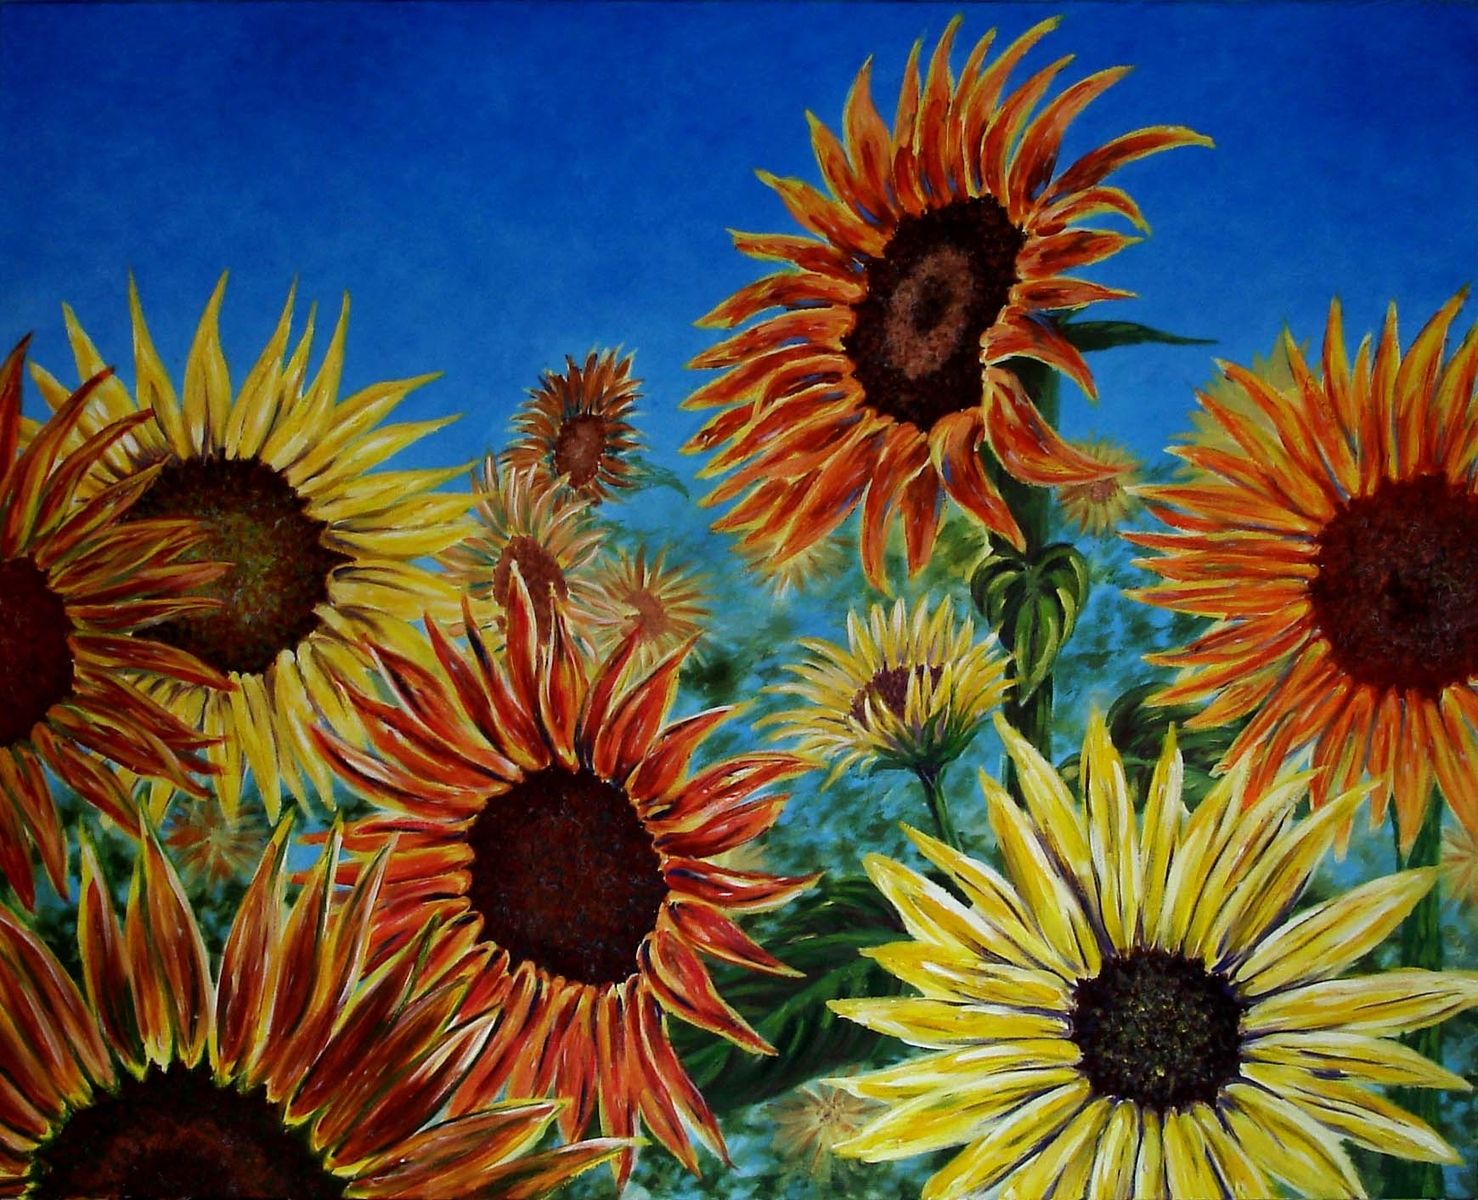 Hand Crafted Sunflowers Mural On Canvas By Visionary Mural Co. by